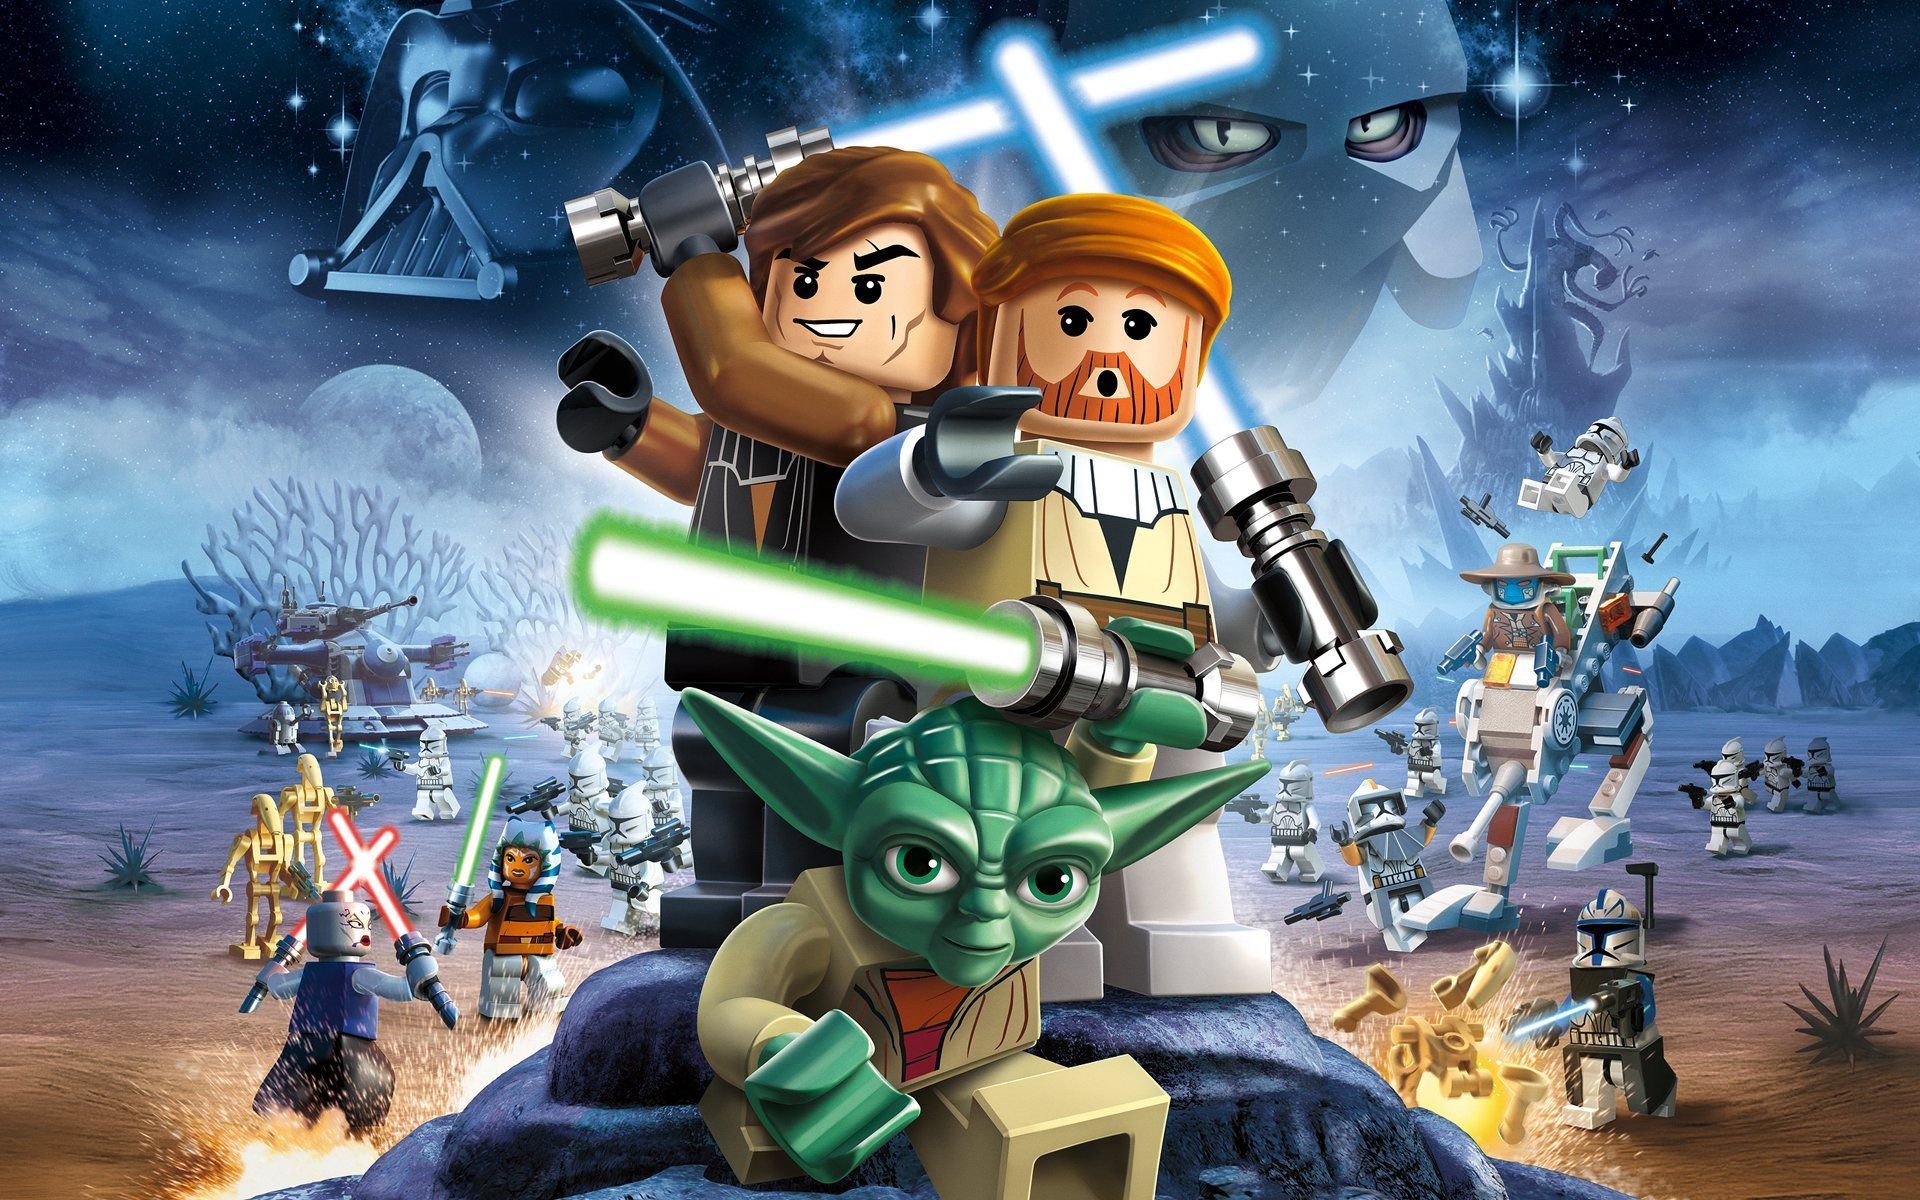 Lego Star Wars Wallpapers - Wallpaper Cave